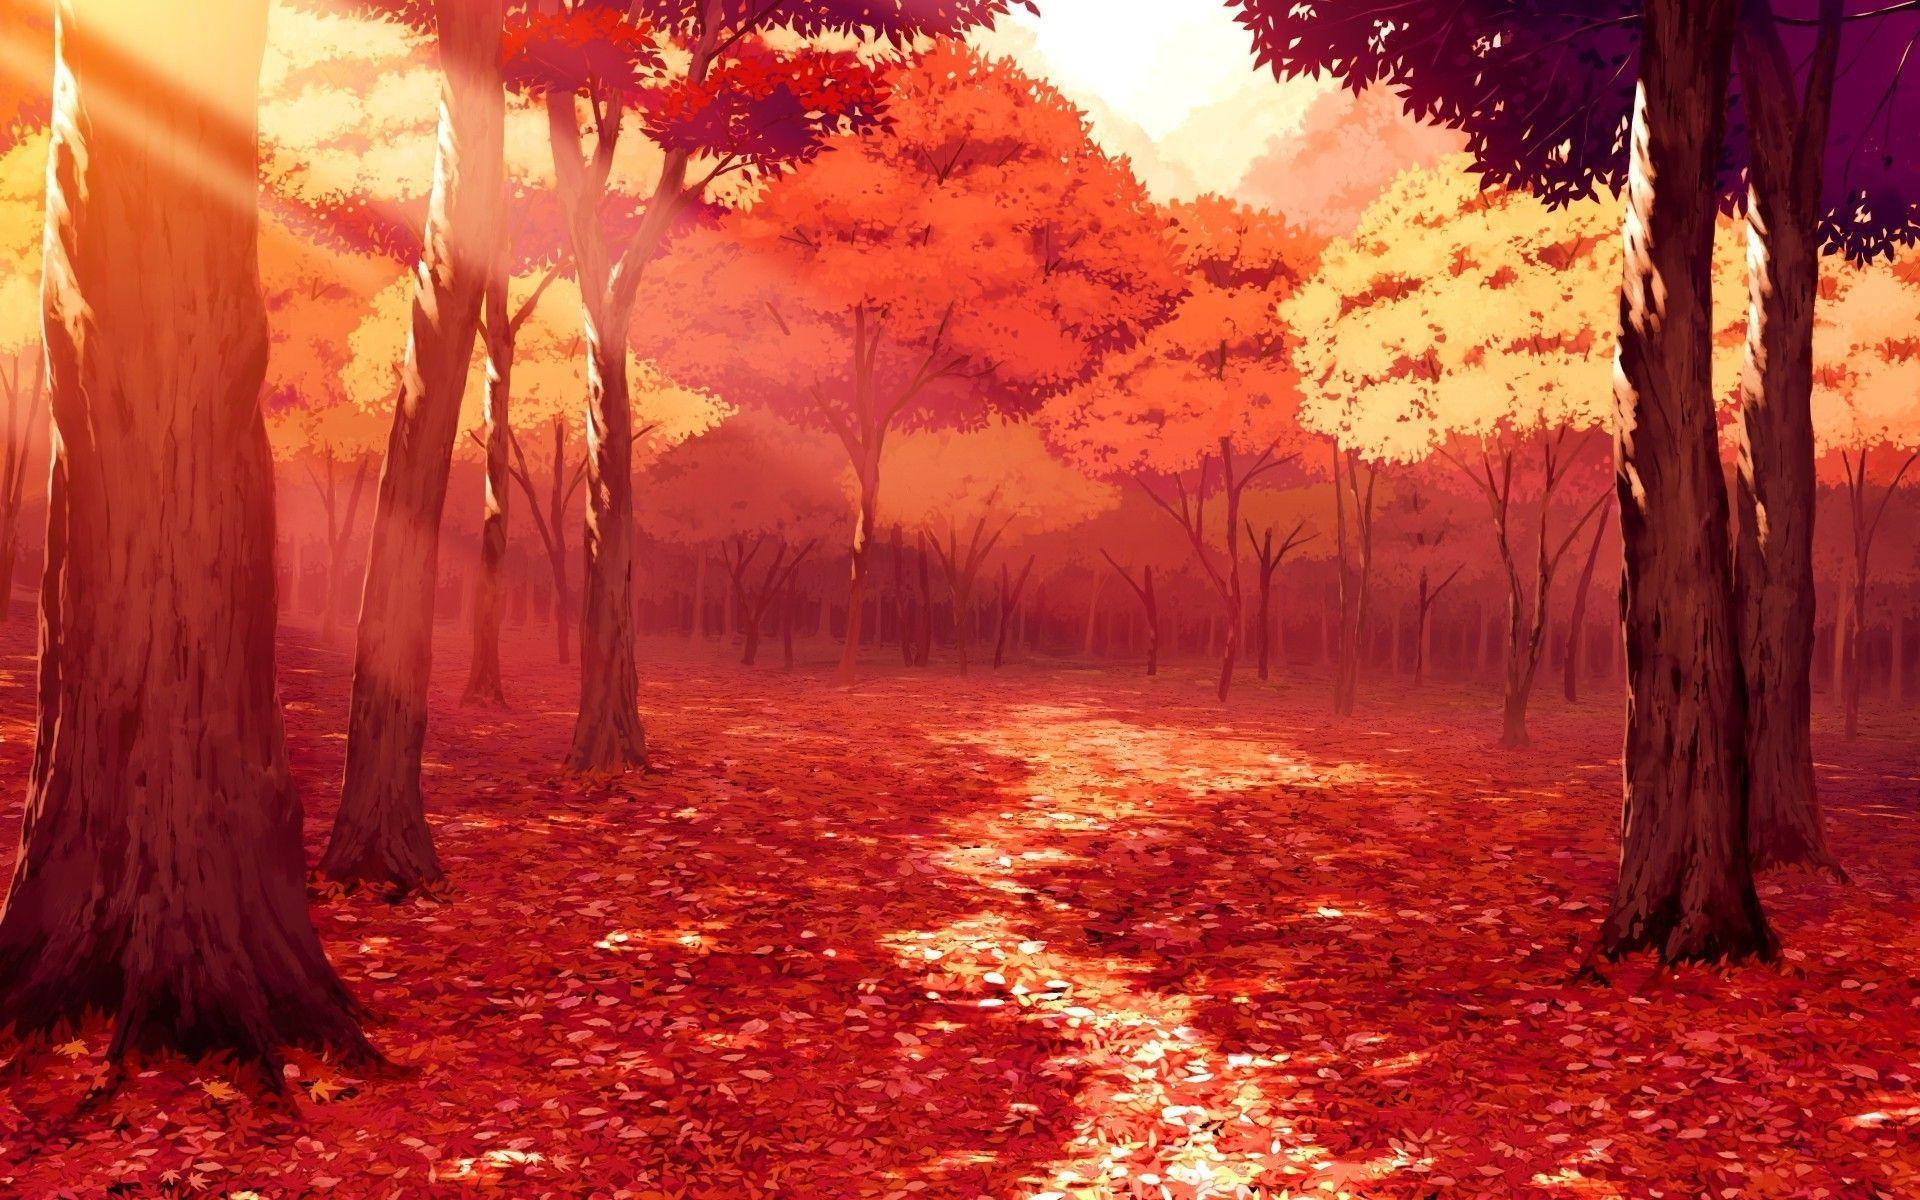 Autumn Maple Leaf Bus Background Wallpaper Image For Free Download - Pngtree